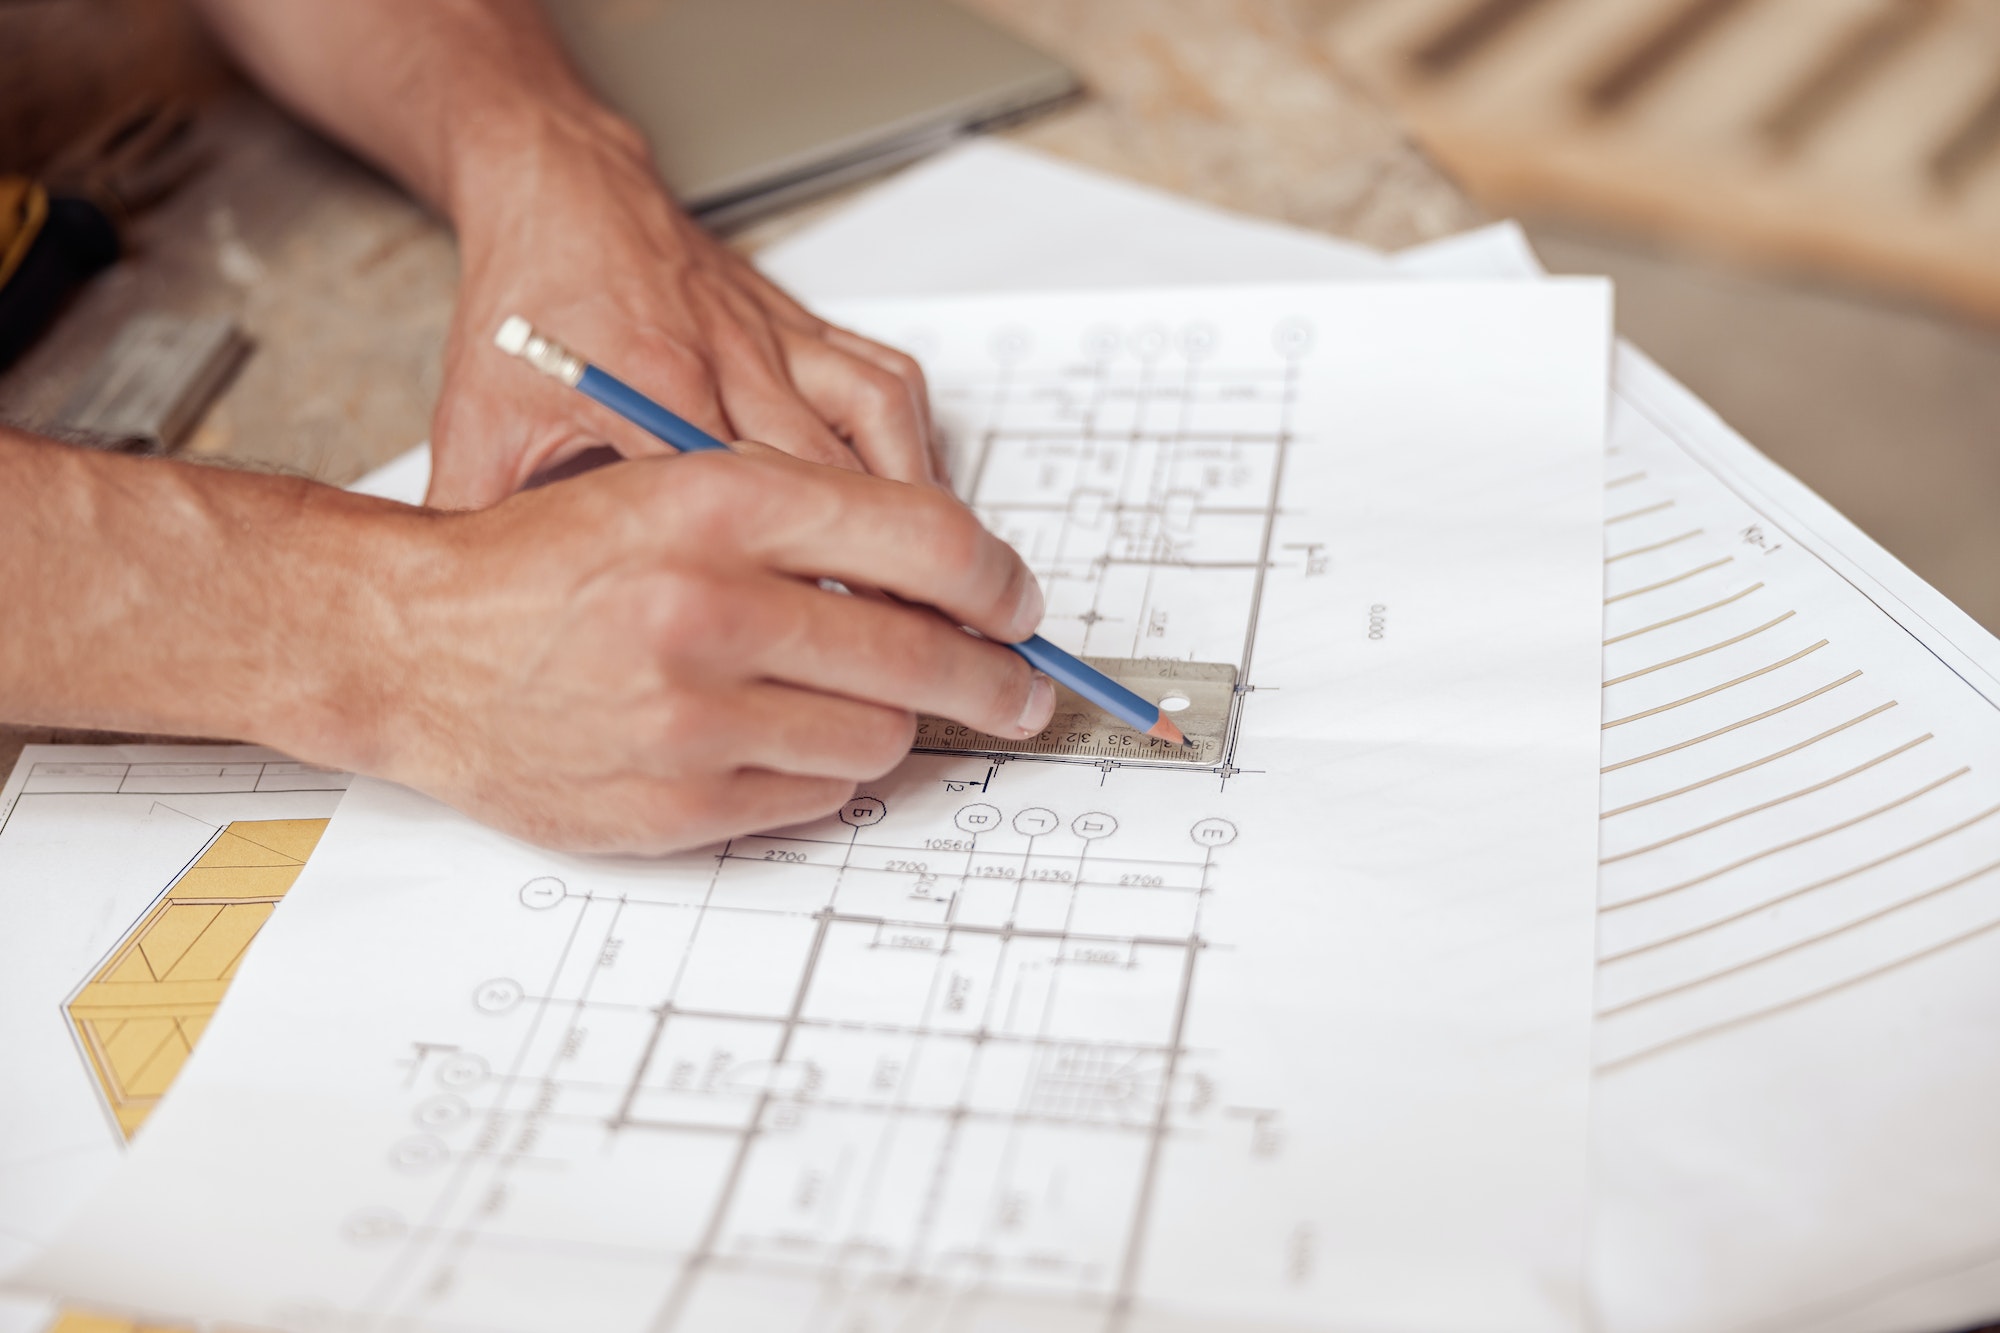 Male architect hands drawing architectural building plan